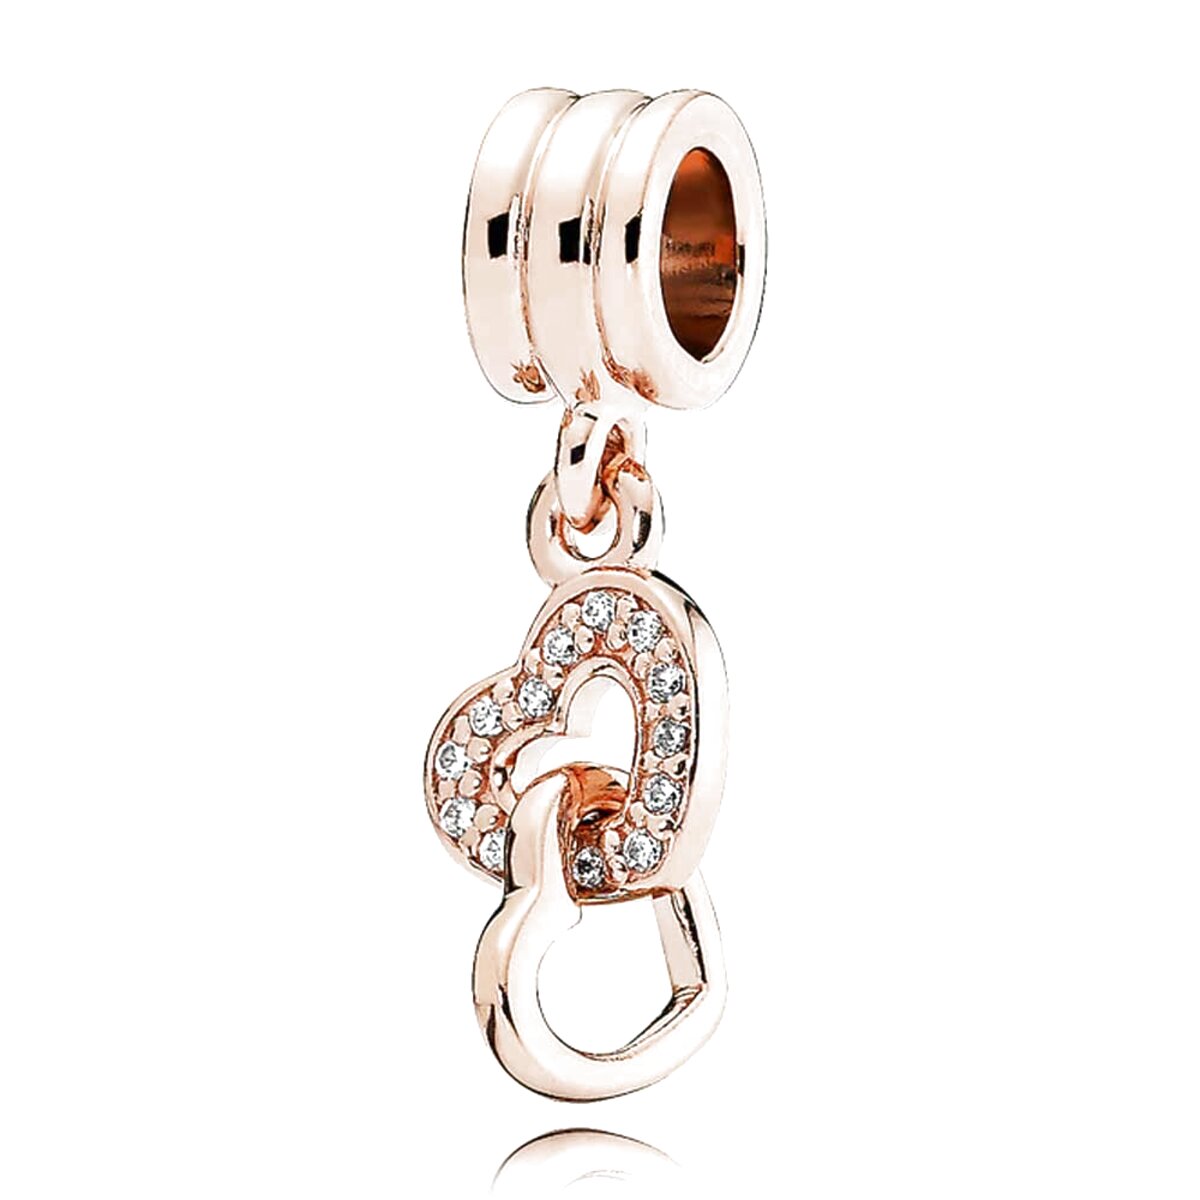 Pandora Charm Earrings for sale in UK | View 48 bargains